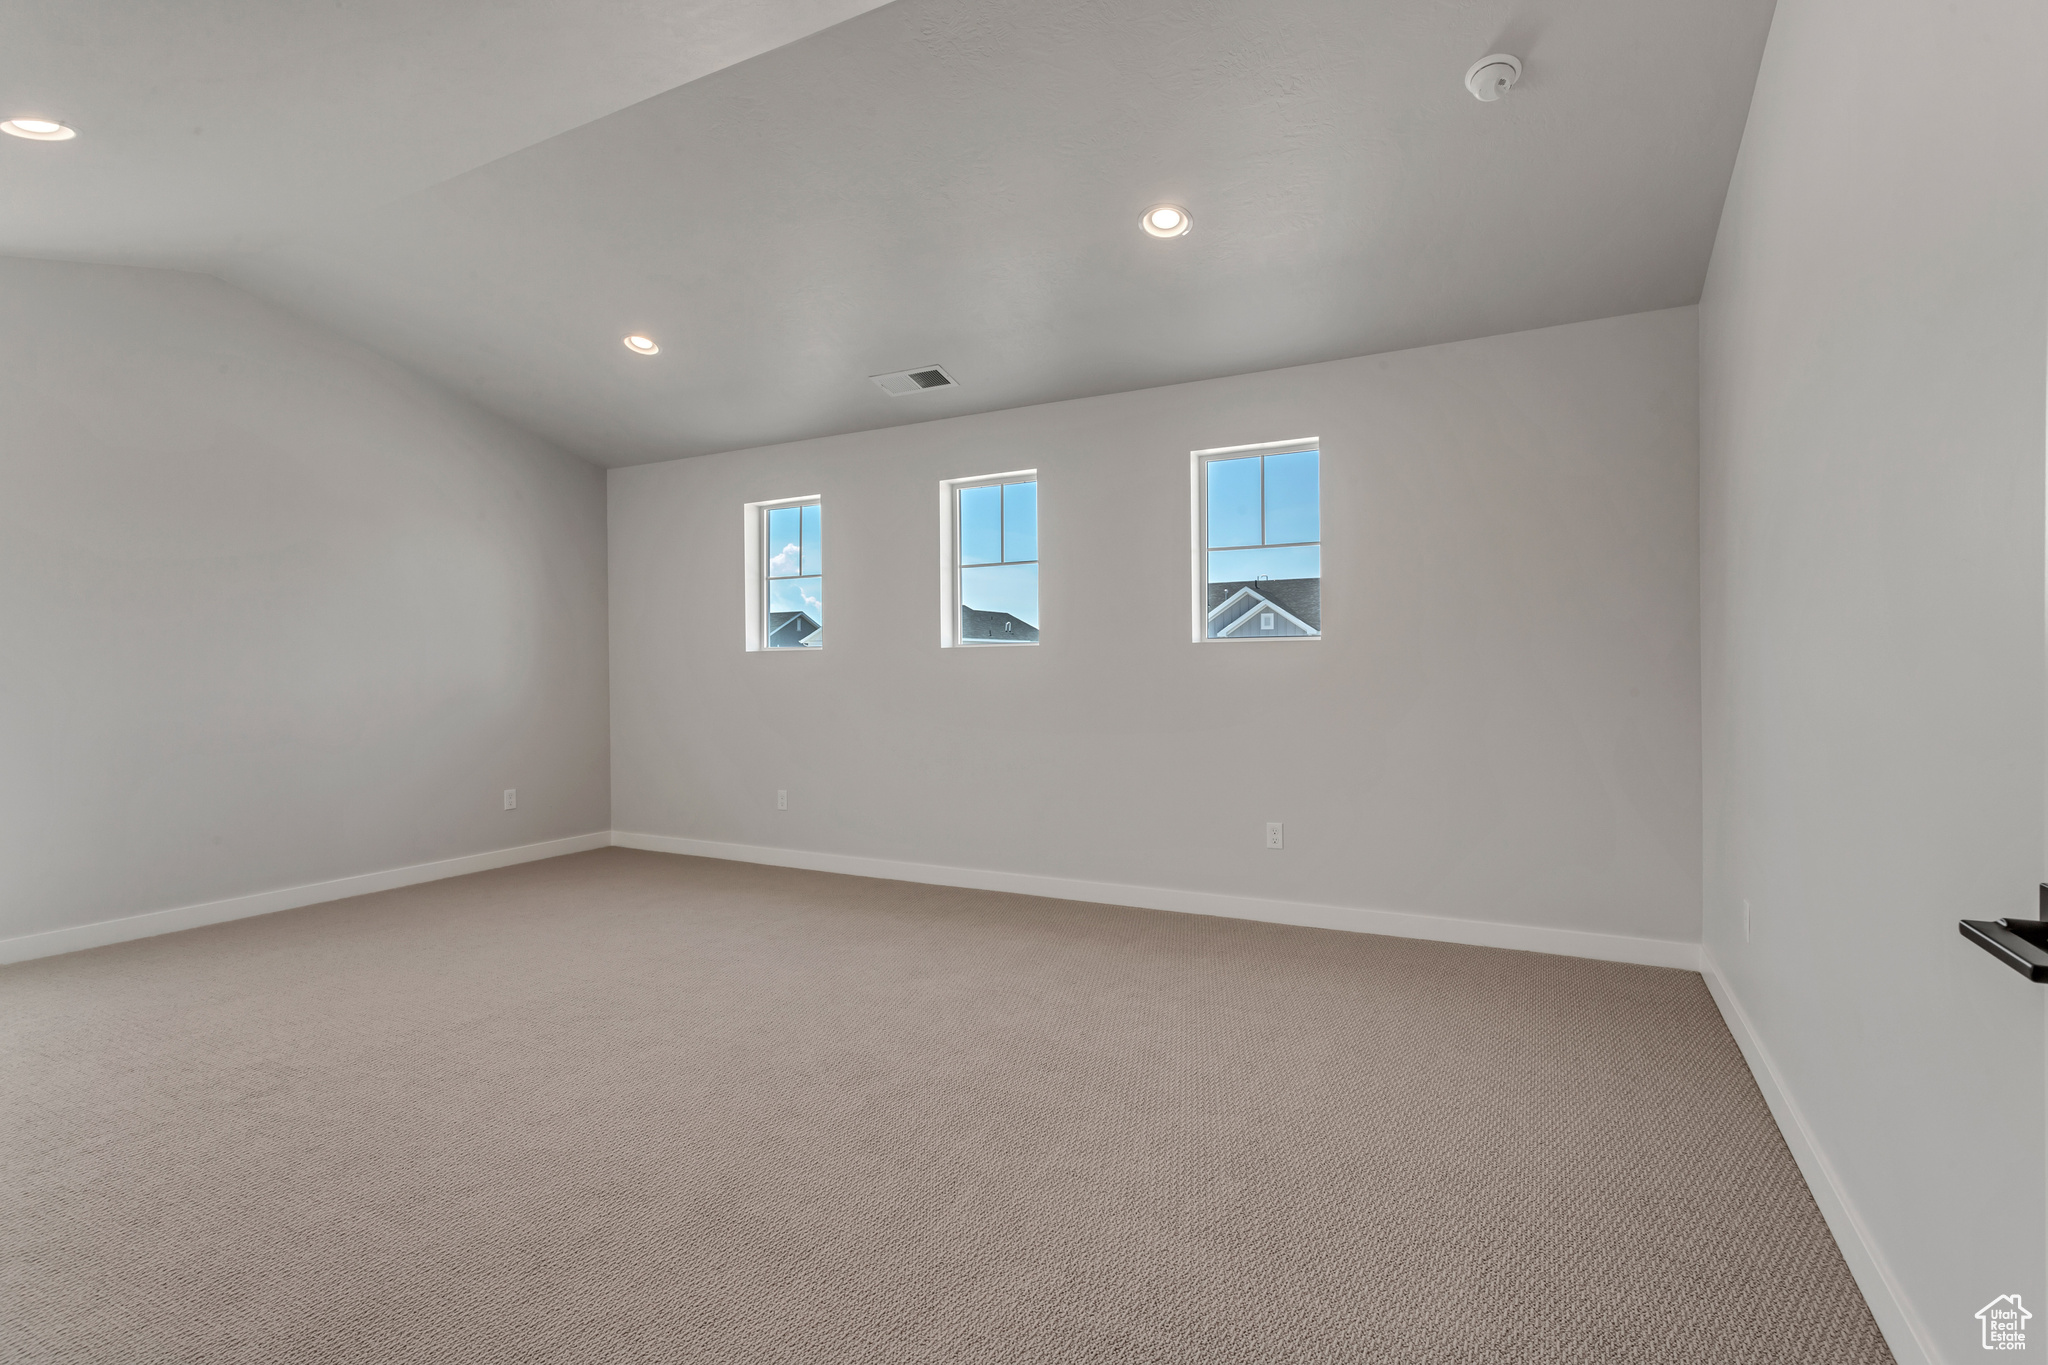 PHOTOS FROM A SIMILAR HOME. COLORS AND SELECTIONS WILL VARY. Primary Suite with light colored carpet and vaulted ceiling